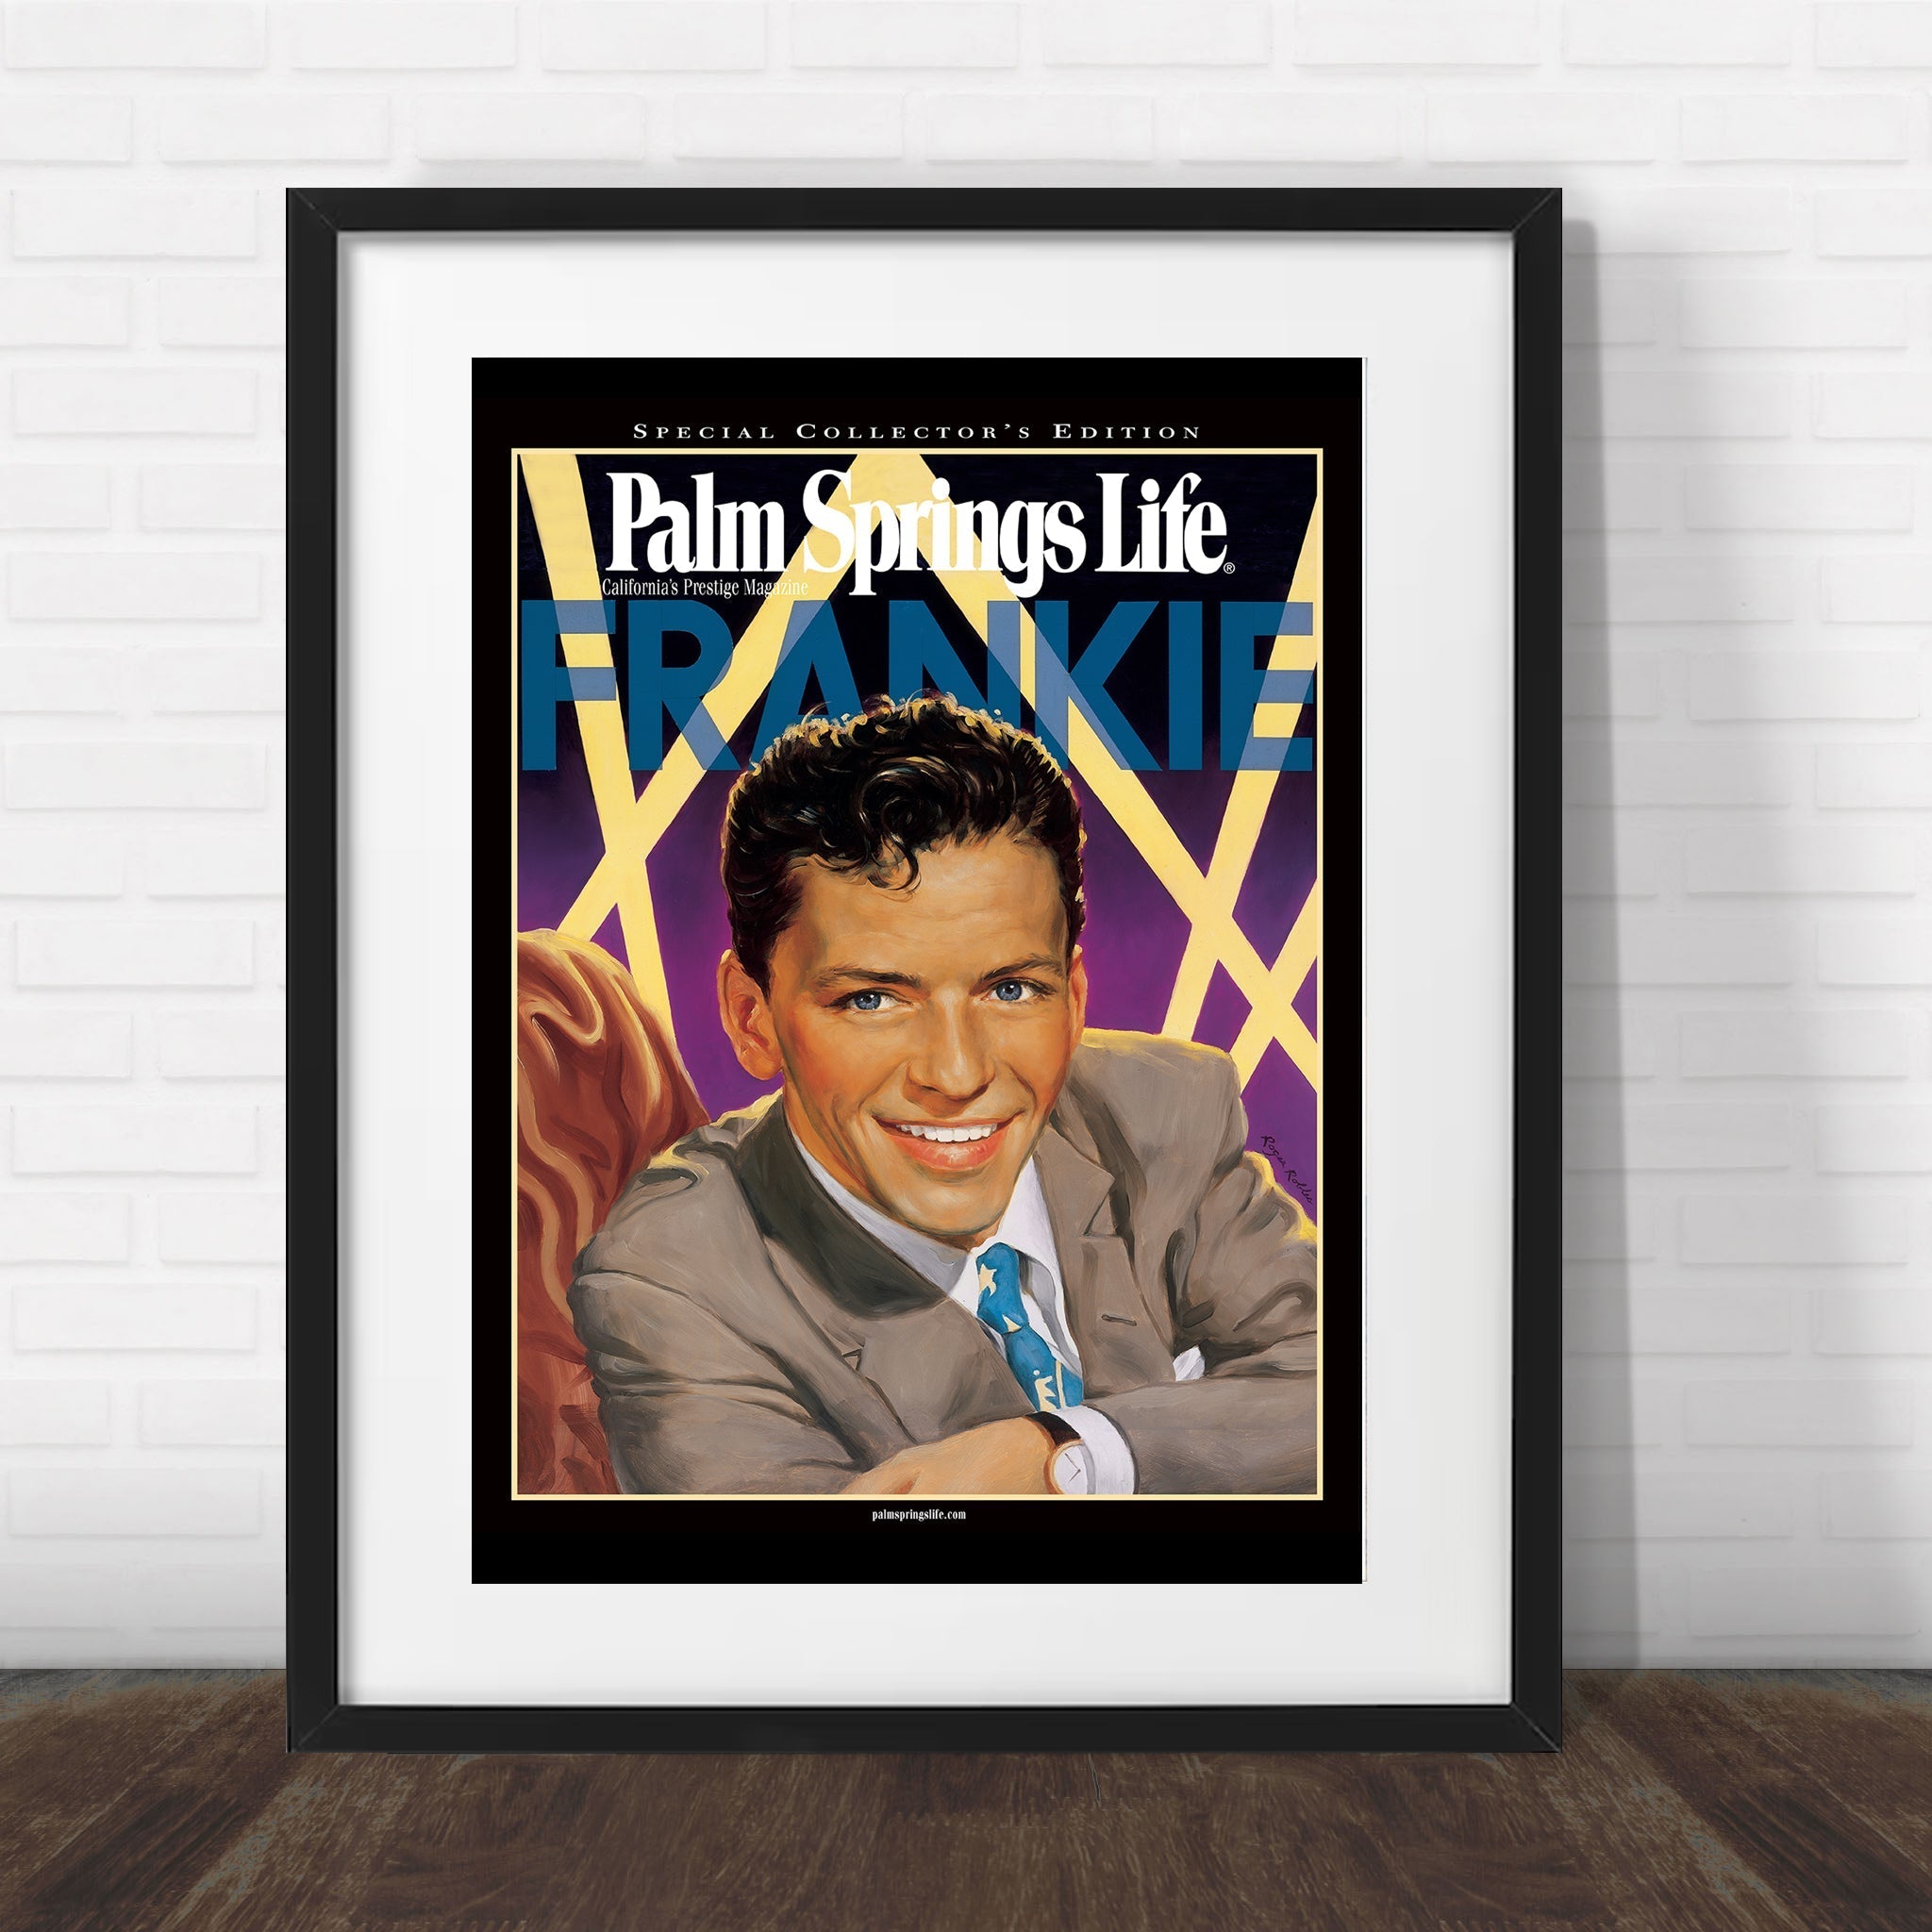 Palm Springs Life - February 2002 - Cover Poster